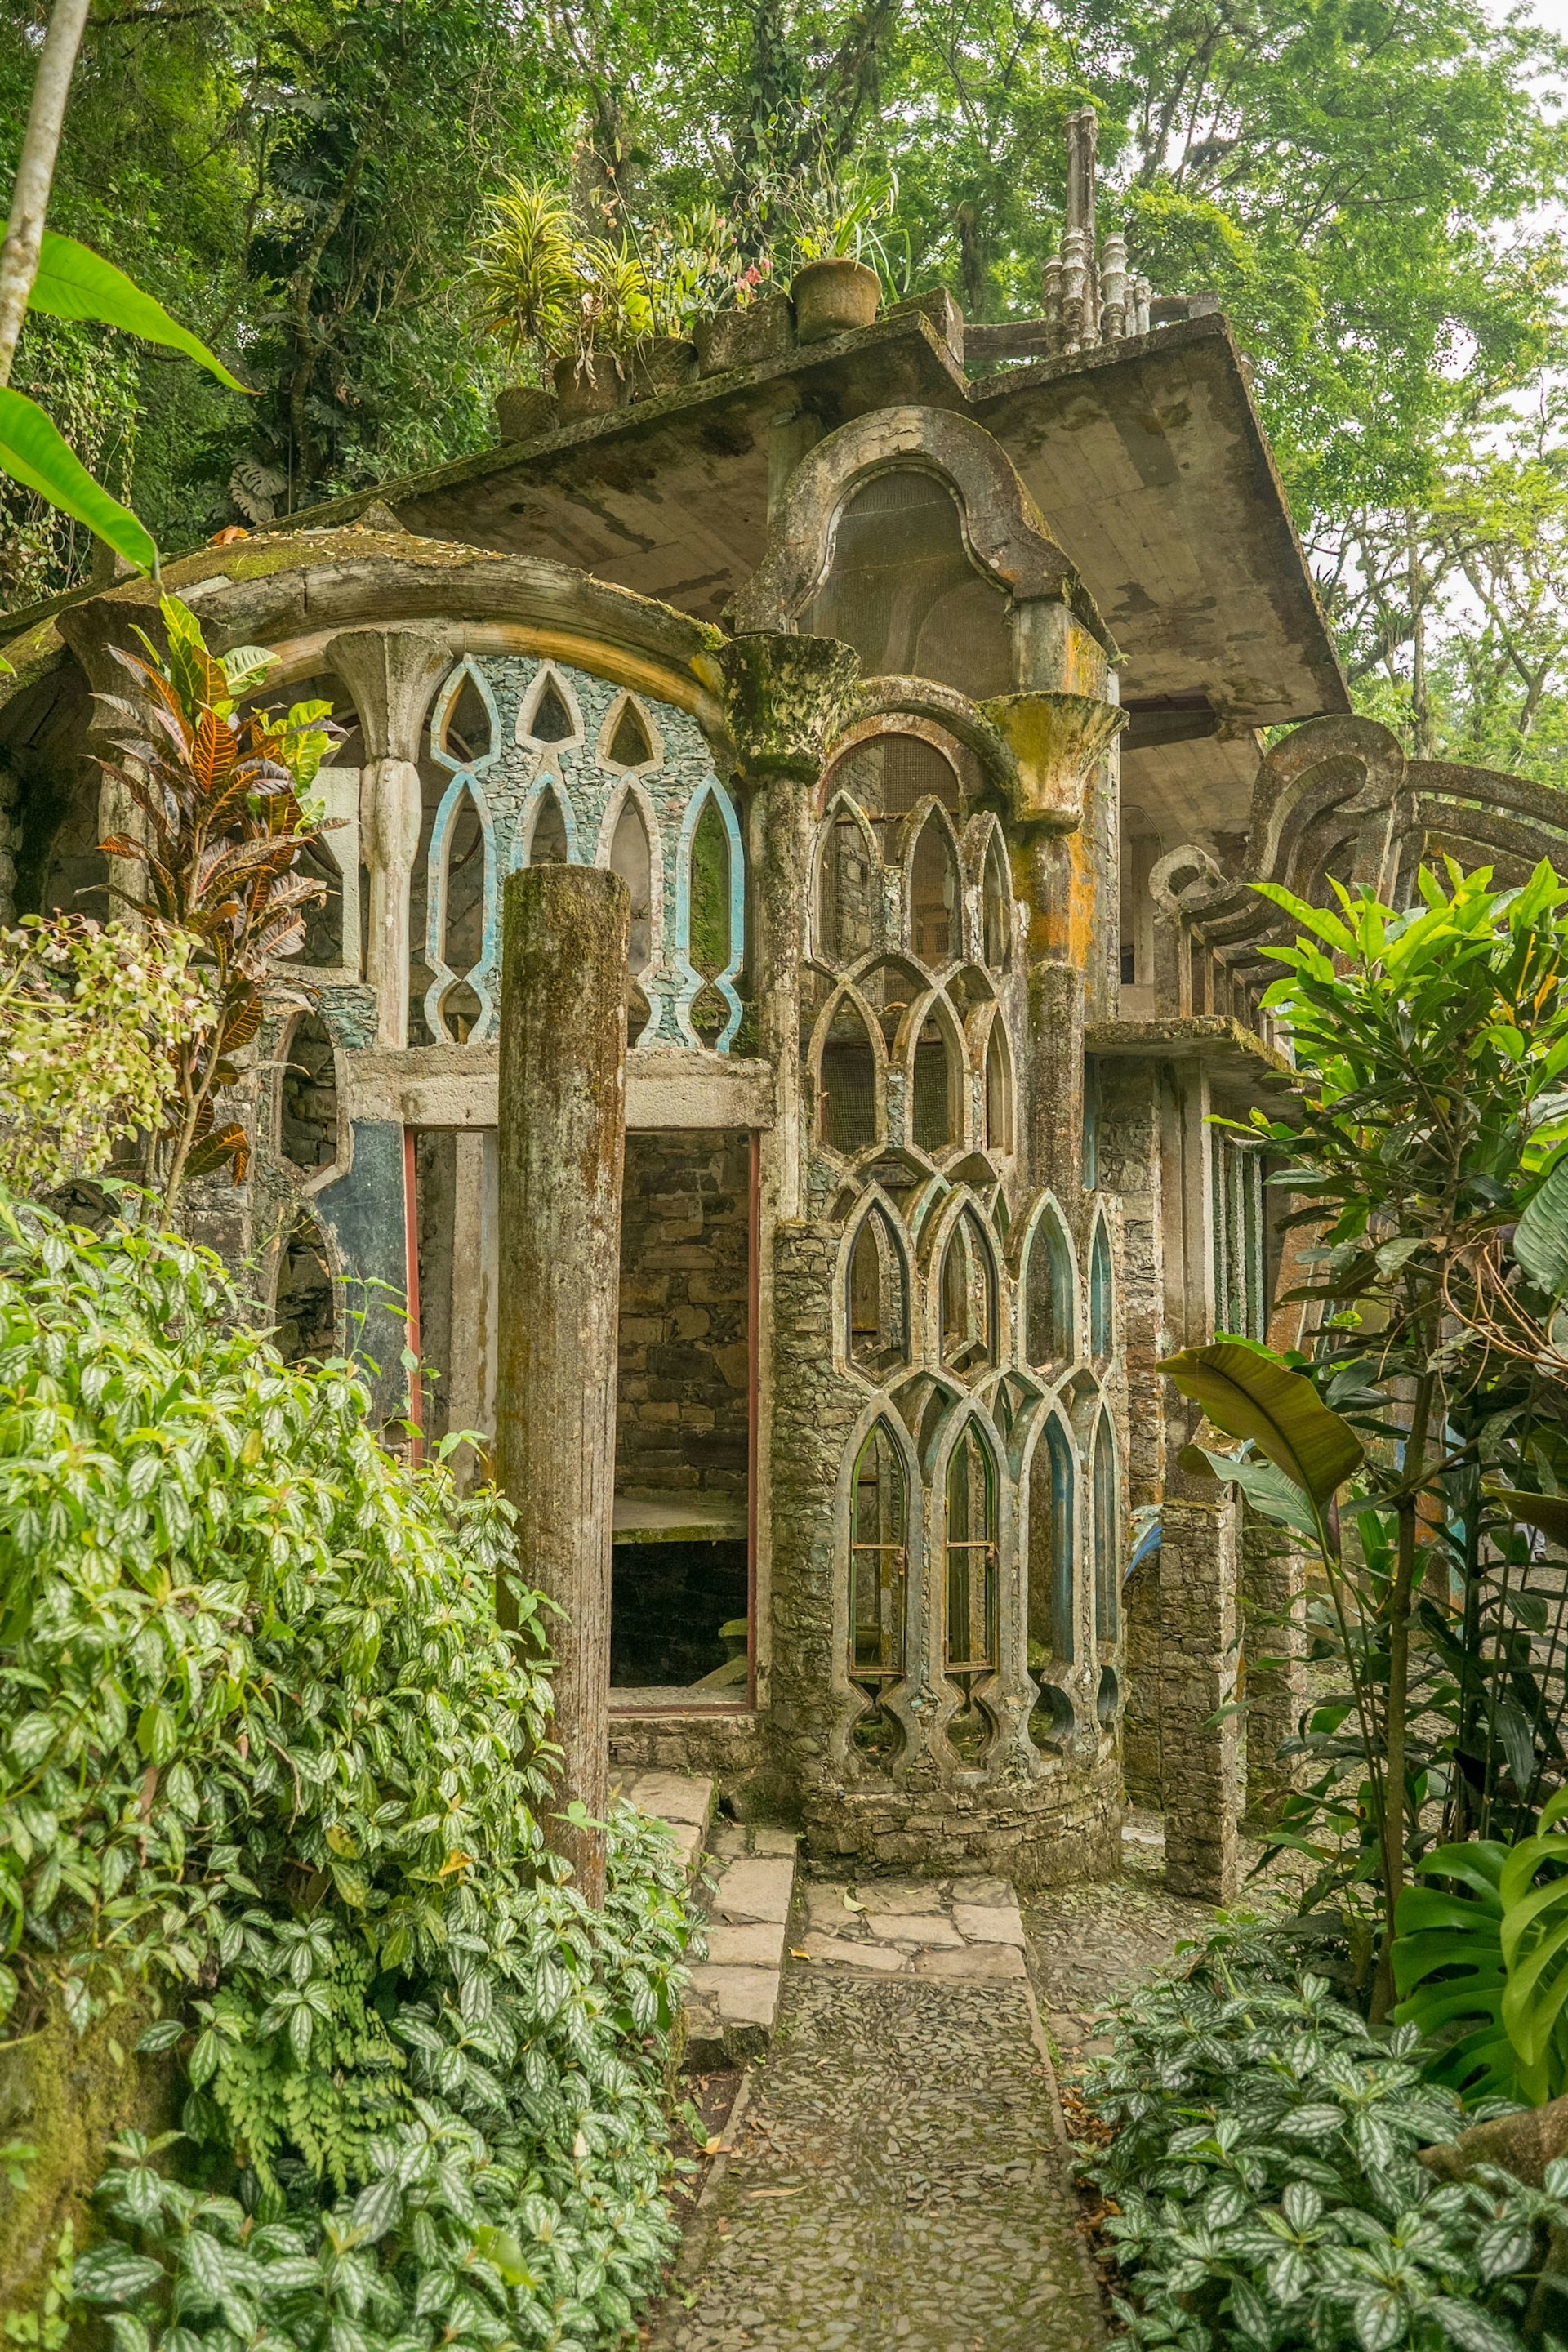 Stone arches filled with glass surrounded by jungle plants